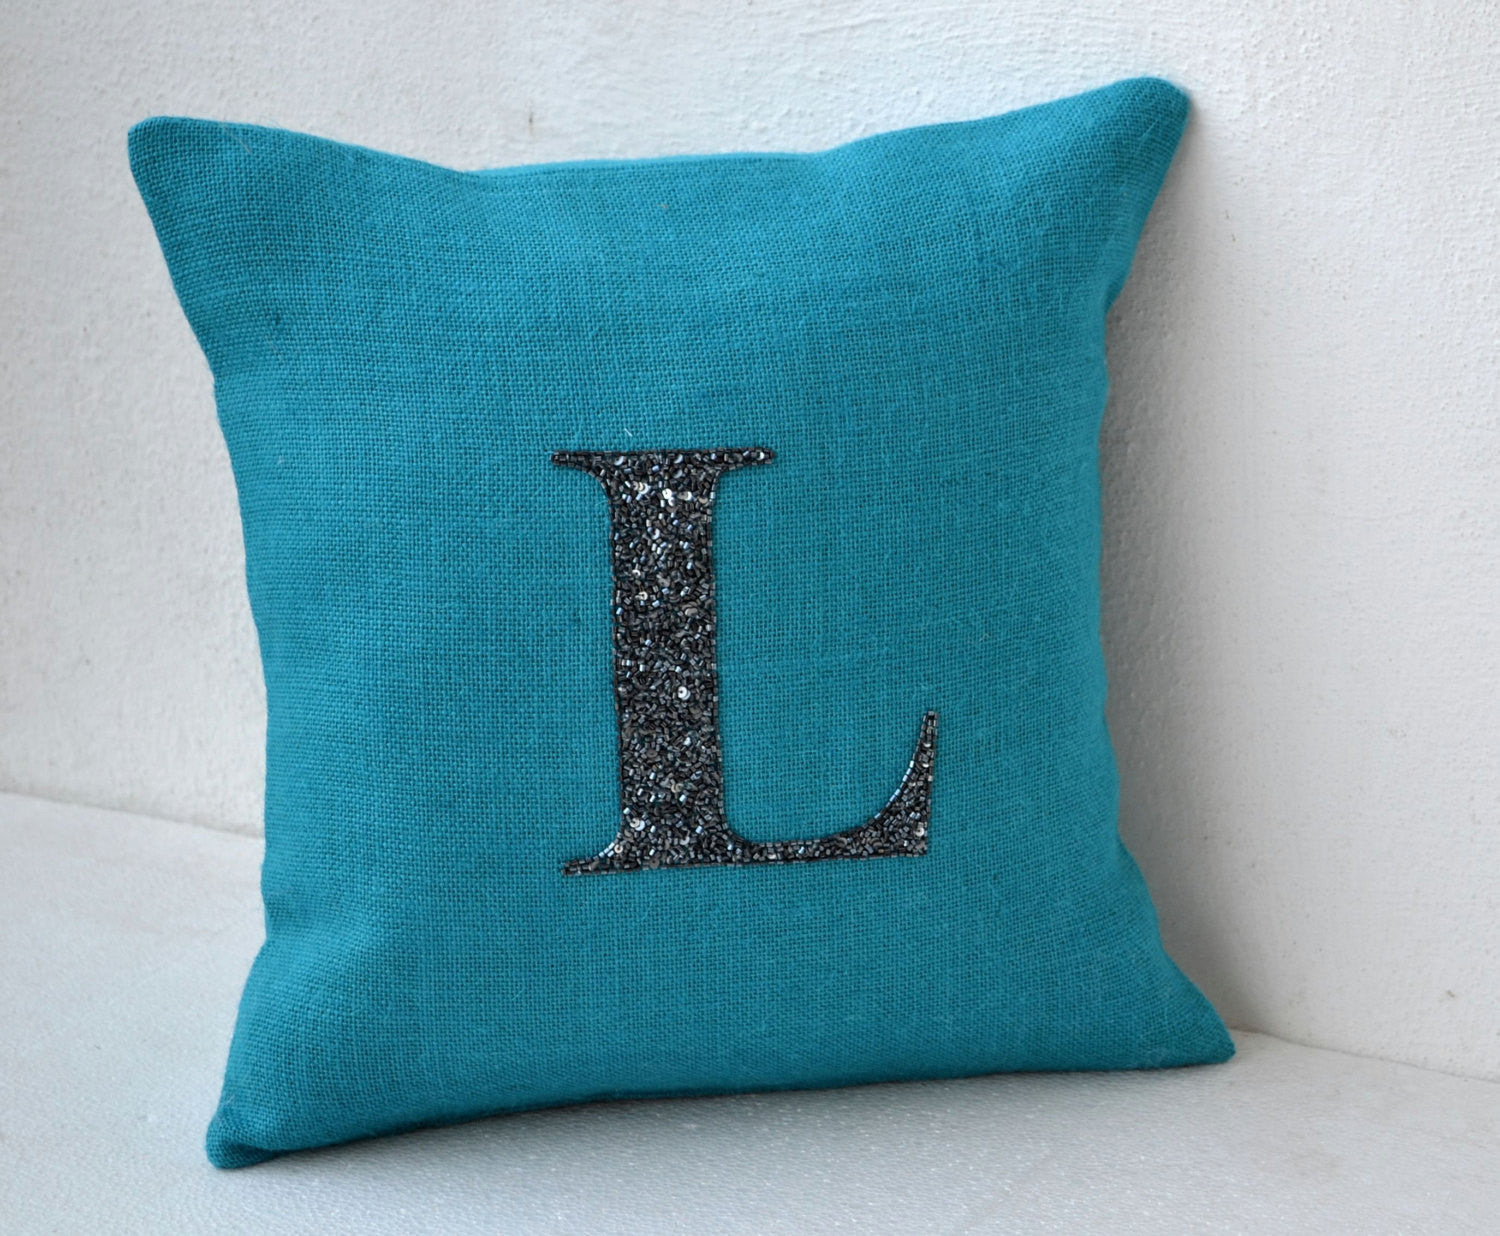 Amore Beaute Customized Monogram In Spakeling Black Beads Sequin On Turquoise Blue Burlap Decorative Throw Pillow Cover